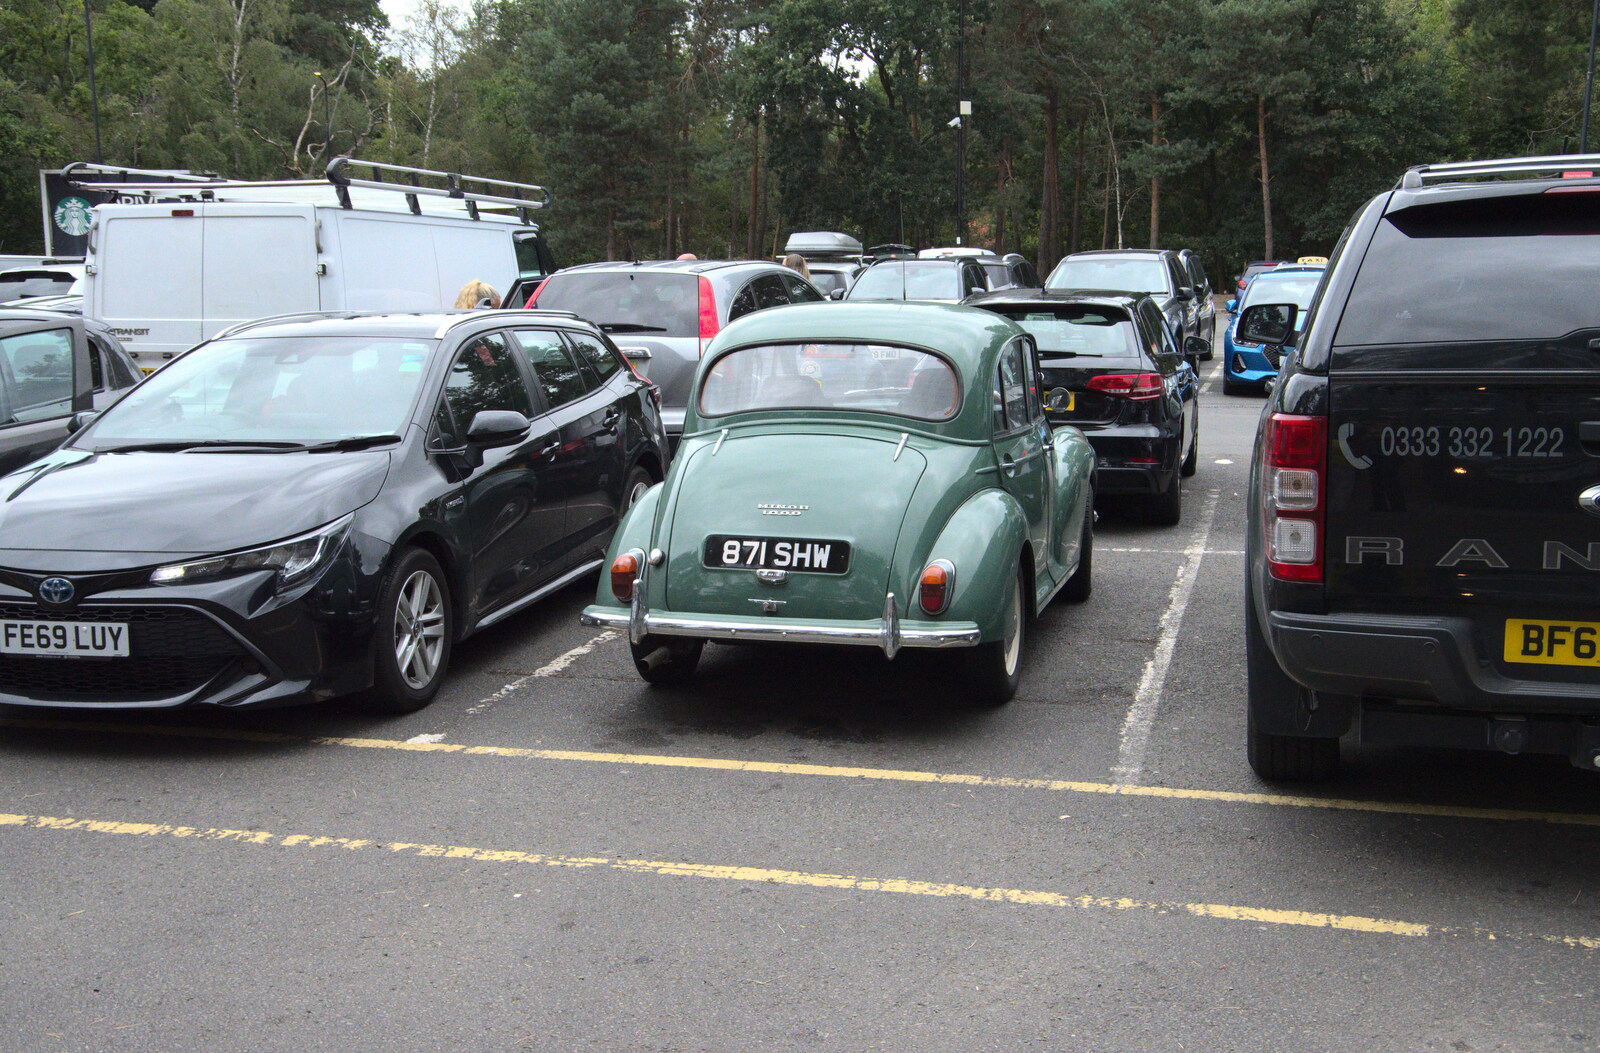 A nice old Morris Minor in the car park at Fleet from A Walk up Hound Tor, Dartmoor, Devon - 24th August 2020